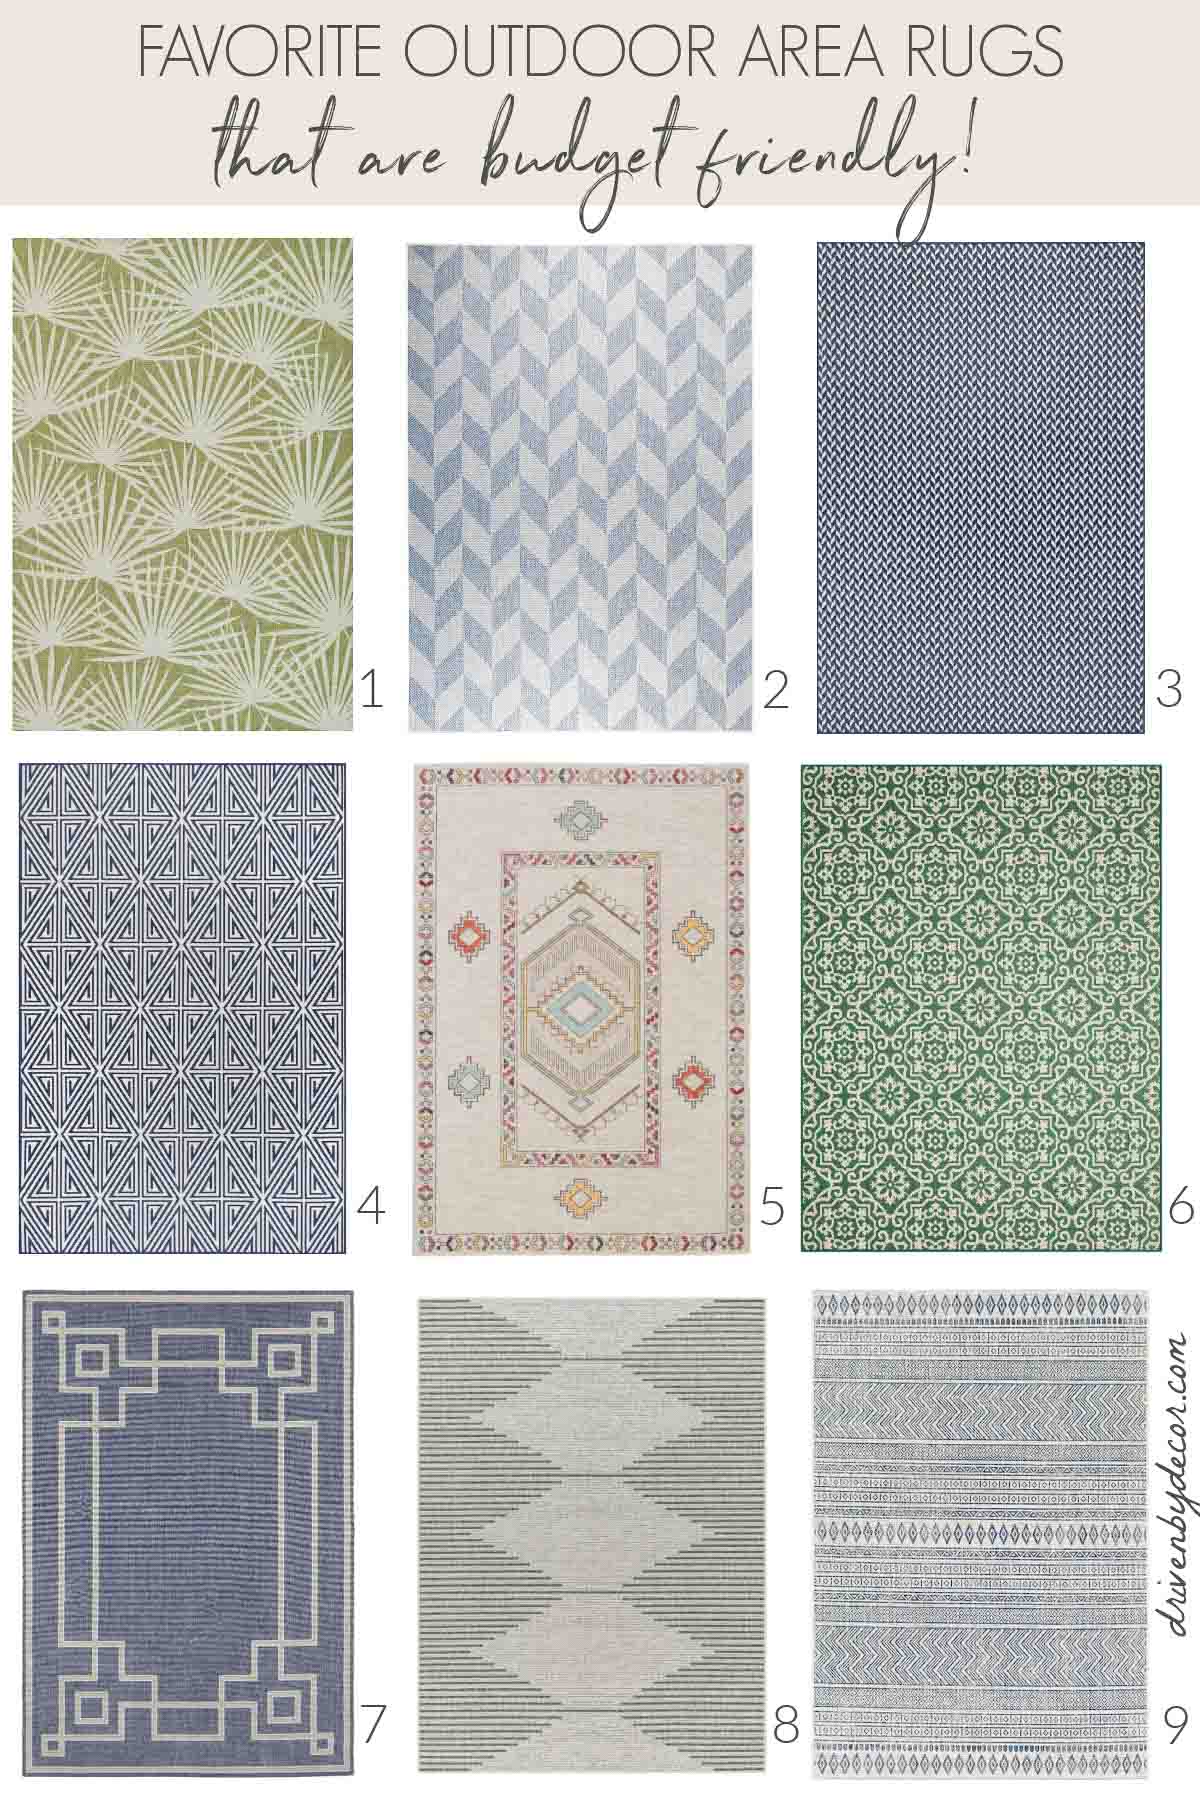 Nine budget friendly outdoor rugs